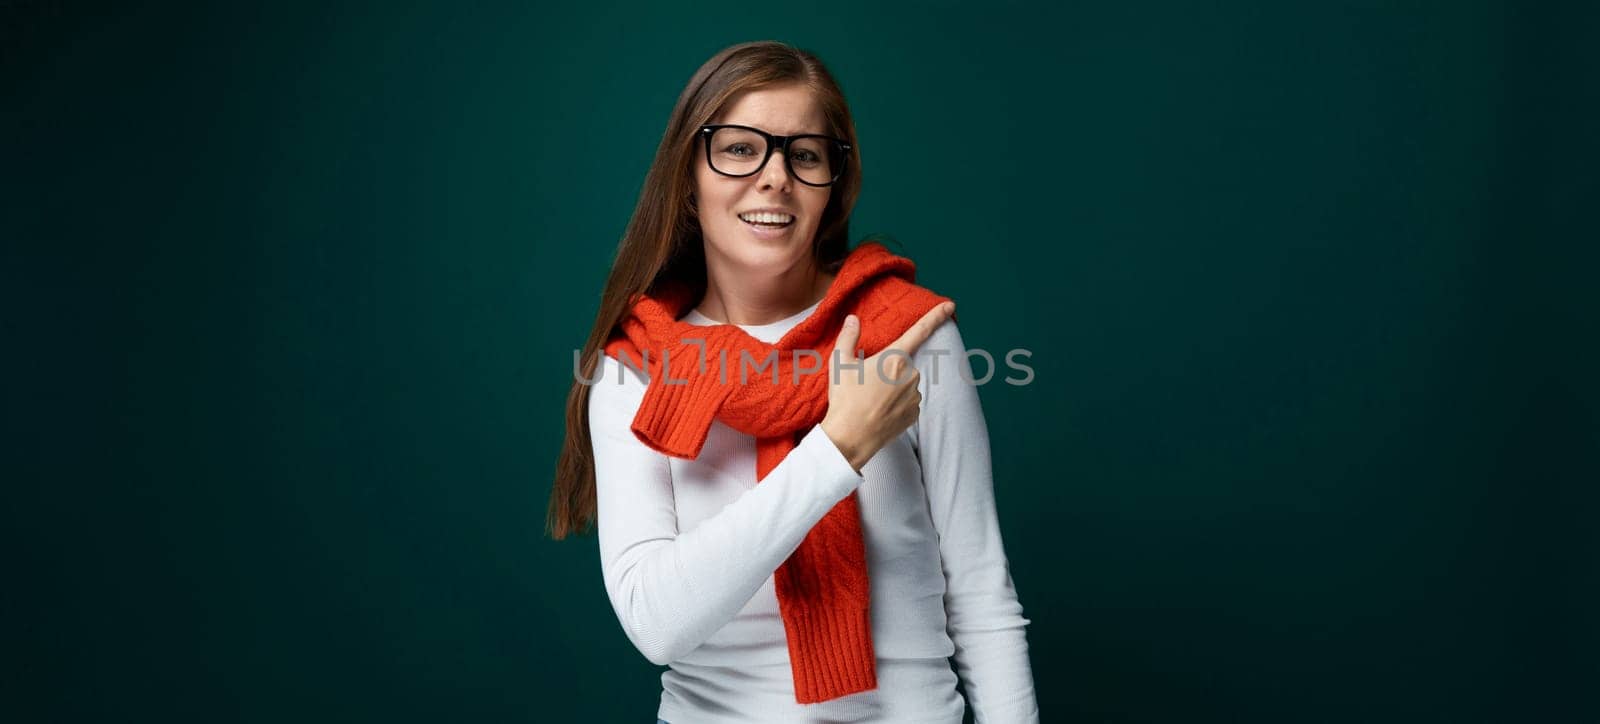 European young woman pointing with hand towards advertisement, business concept.